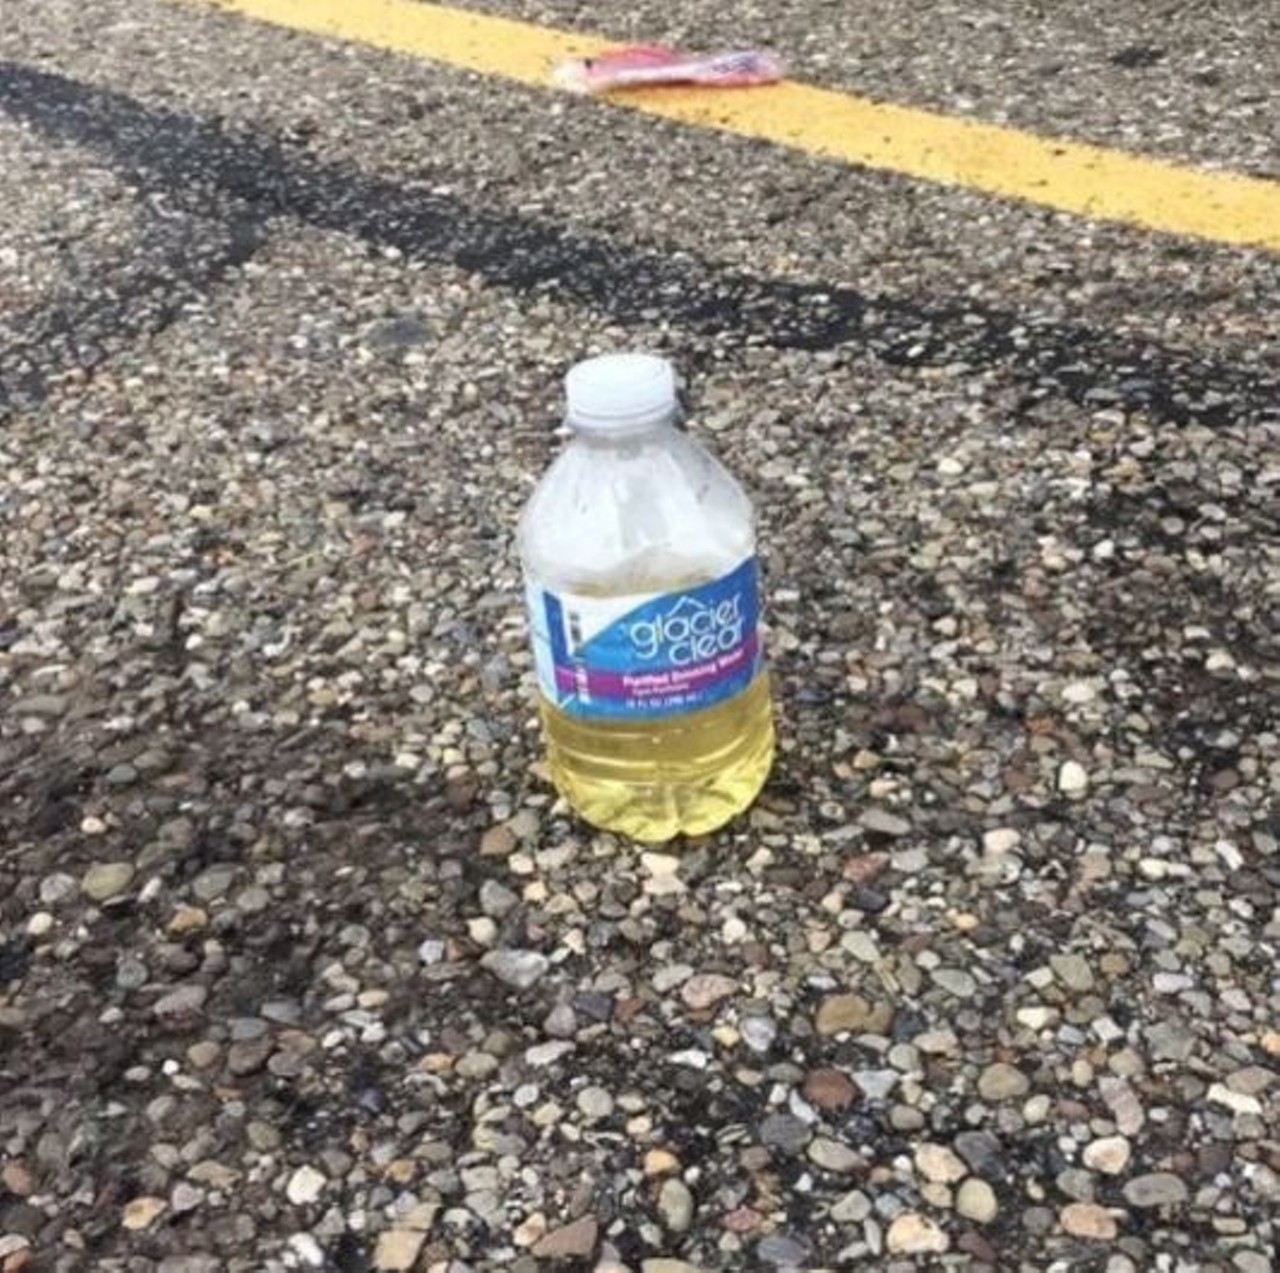  &#147;There&#146;s an Instagram Account Devoted to Piss Jugs in Akron&#148; 
April 27
The next time you see a water bottle, soda can or jug of piss on the side of the road, you know where to submit a photo of it. While this account is a departure from typical Instagram fare of FitTea and sugary hair vitamins, they&#146;ve amassed over 600 followers. As the account's owner told Scene, &#147;we all need hobbies.&#148;
Photo via akrontruckerbombs /Instagram